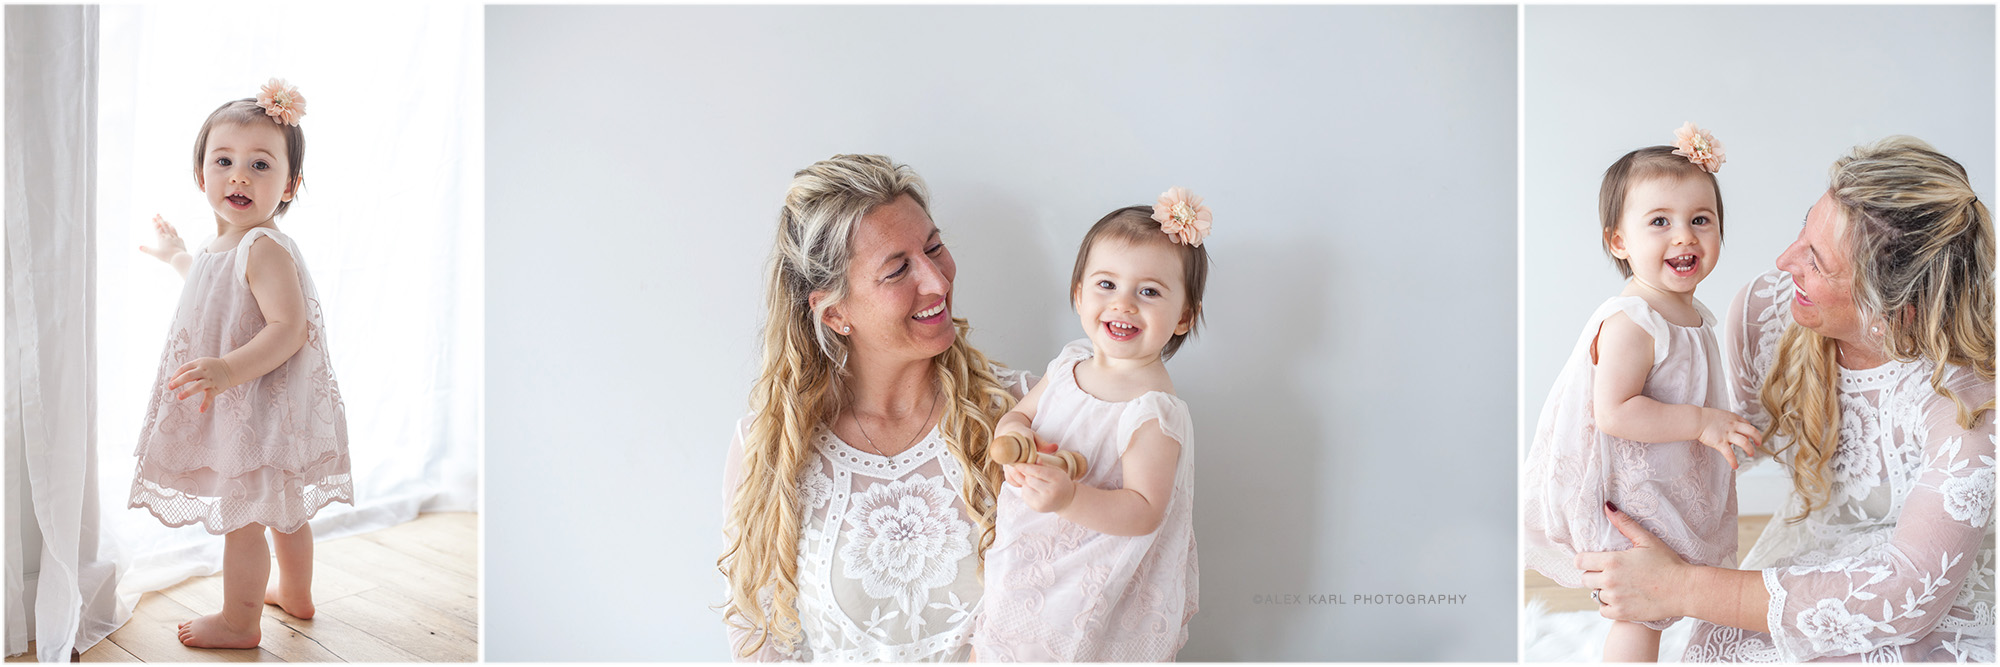 A mother holds her baby | Alex Karl Photography | Palm Beach Family Photographer